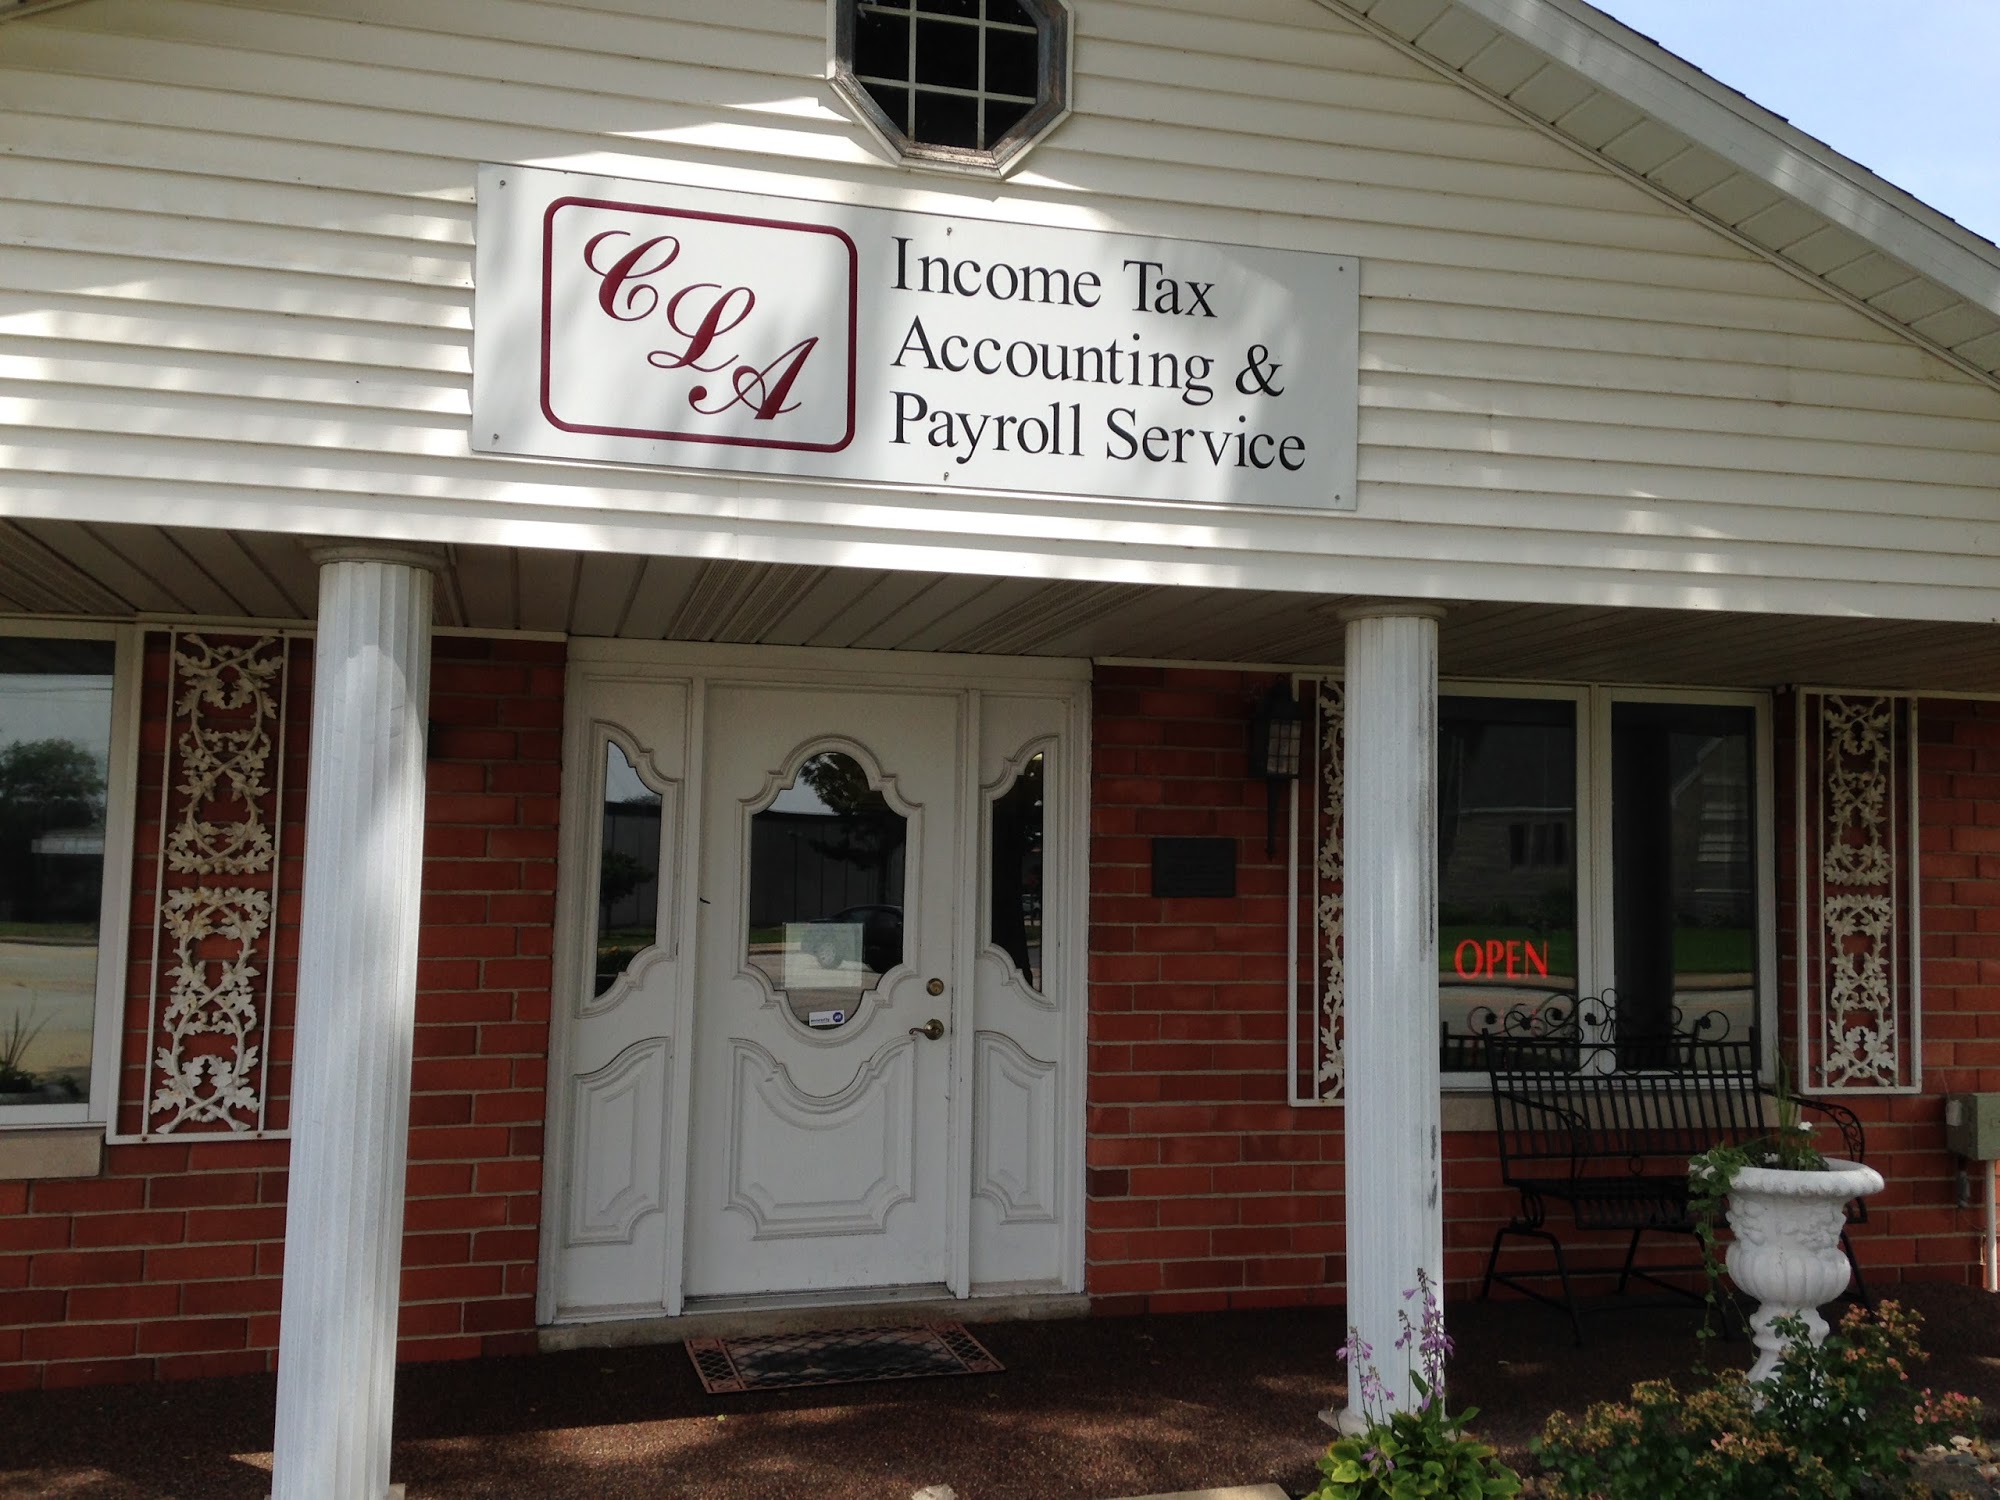 CLA IncomeTax, Accounting & Payroll Service